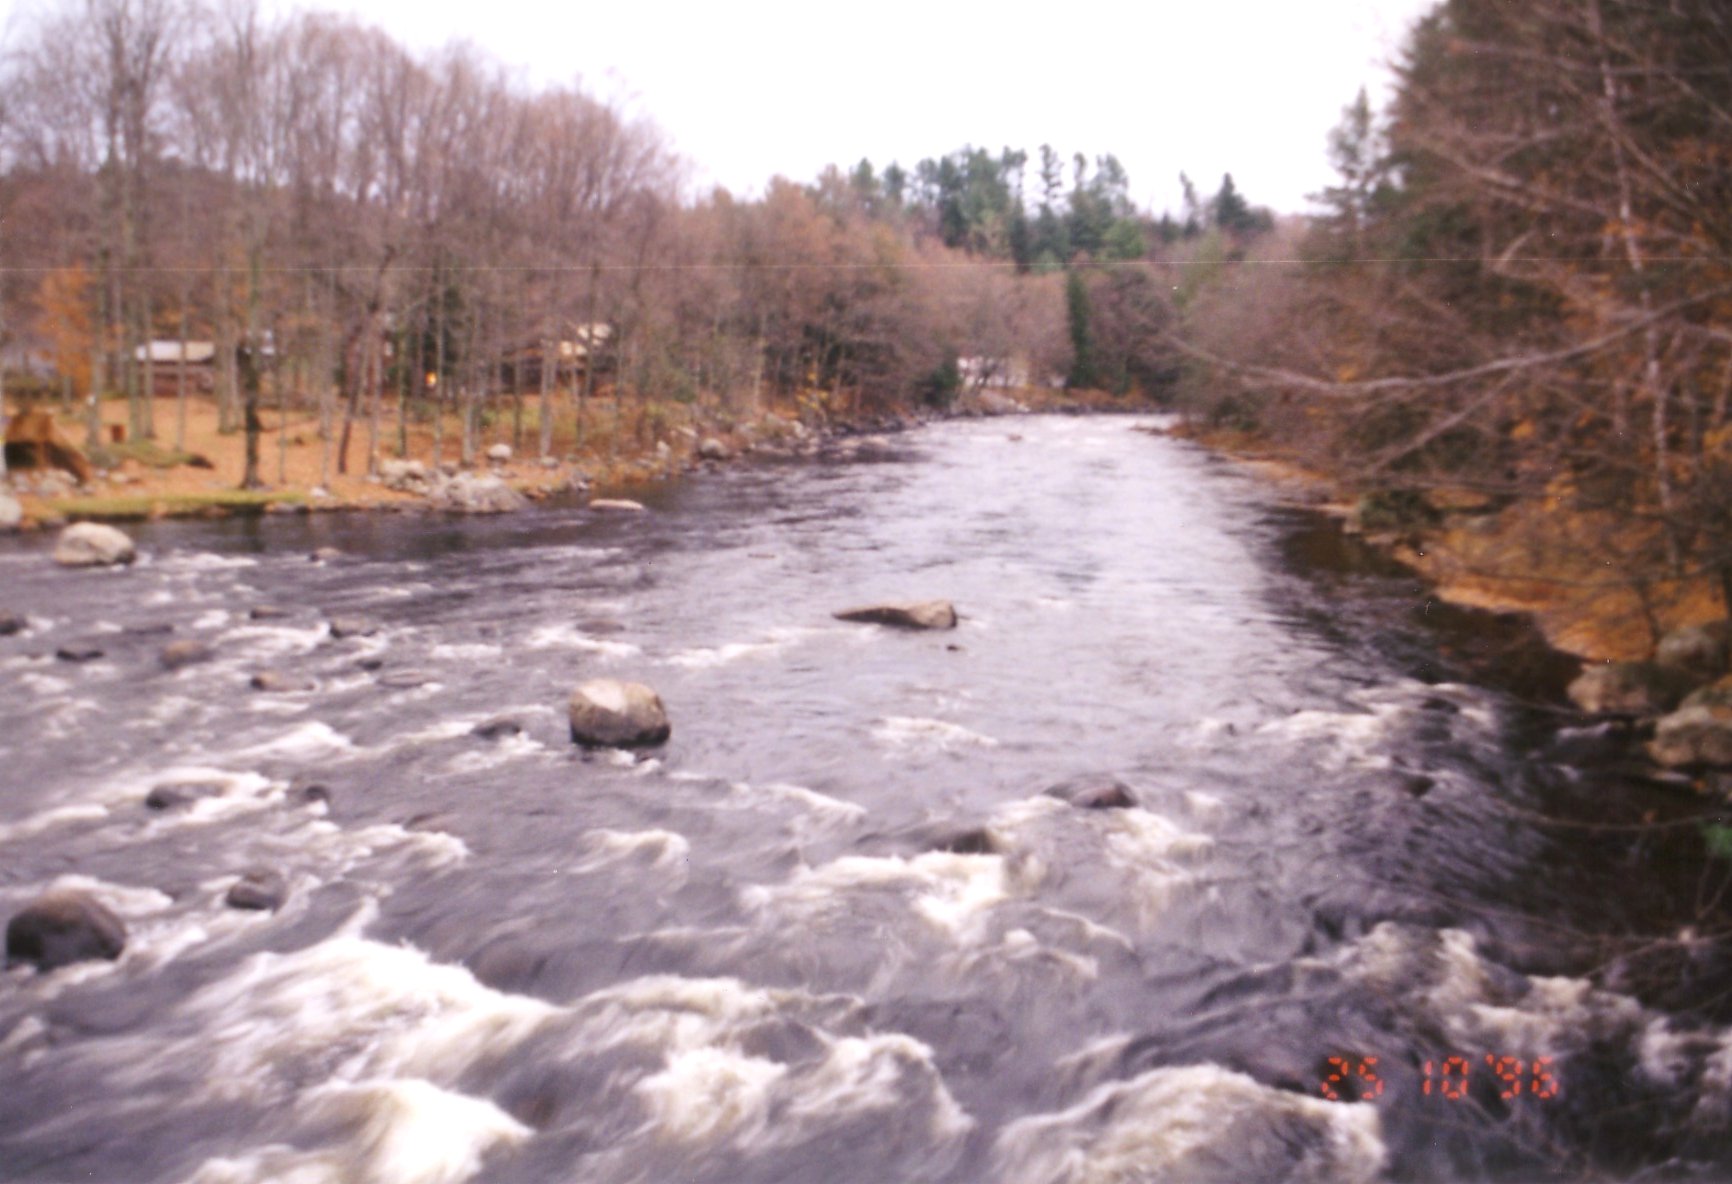 Photograph of the Black River Near Boonville, NY (BOON6)